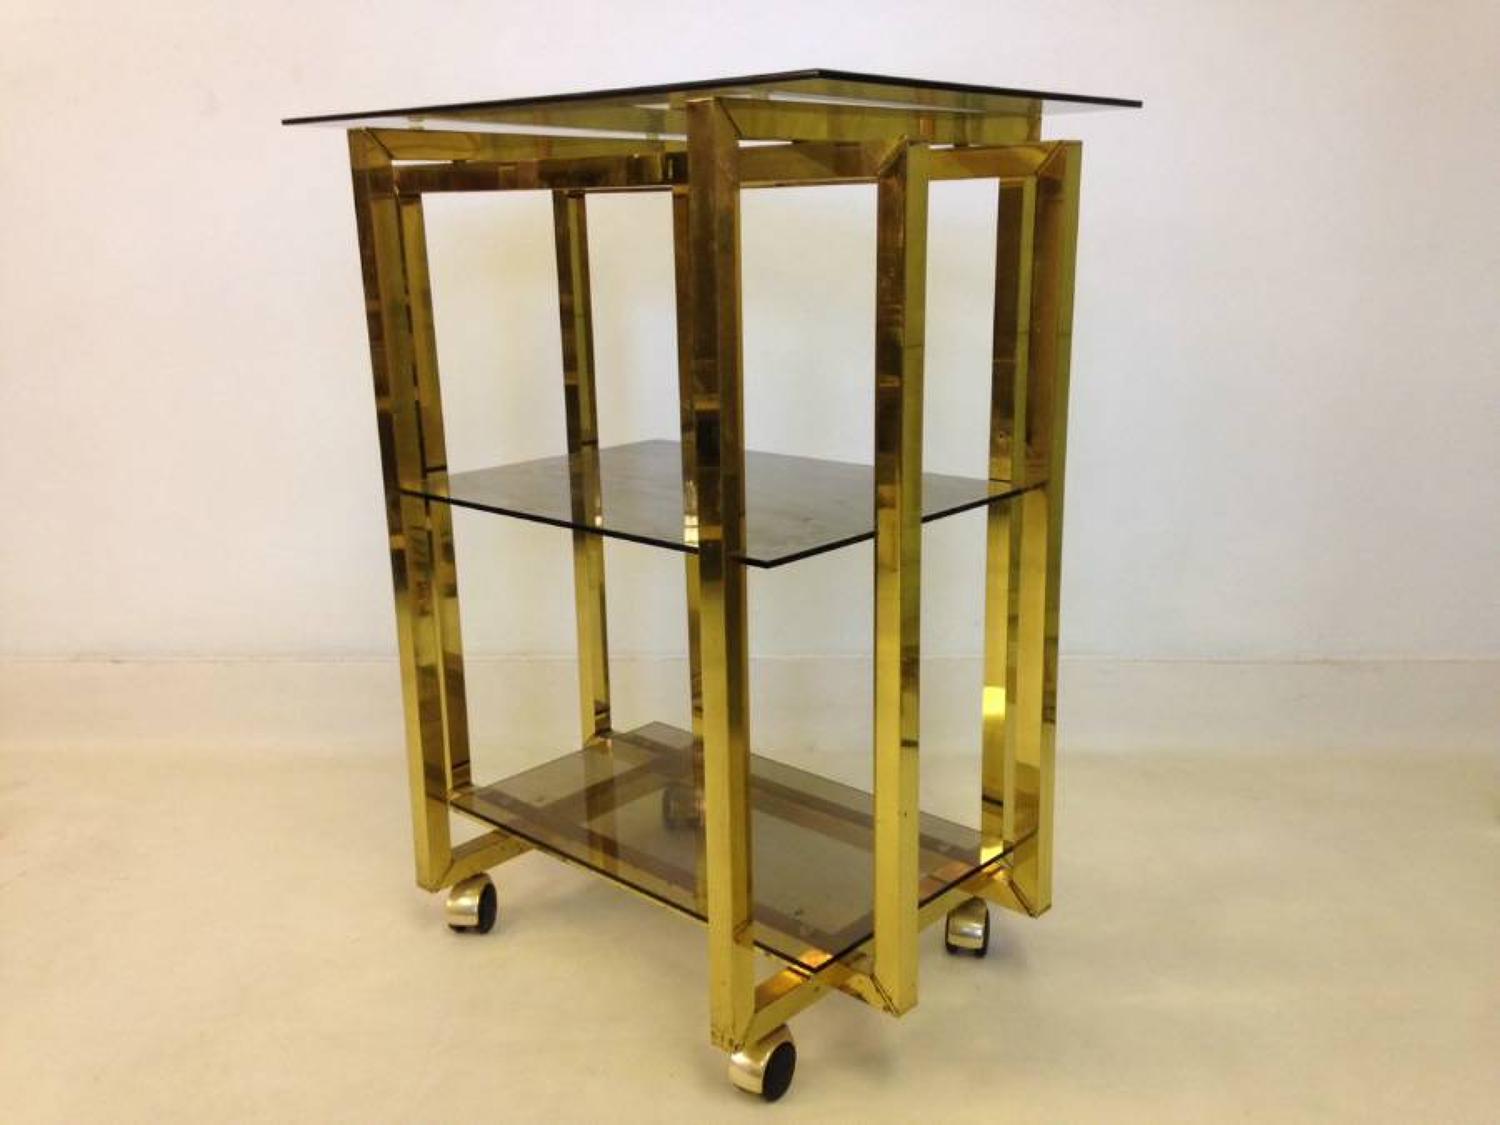 Gold lacquered metal side table or trolley